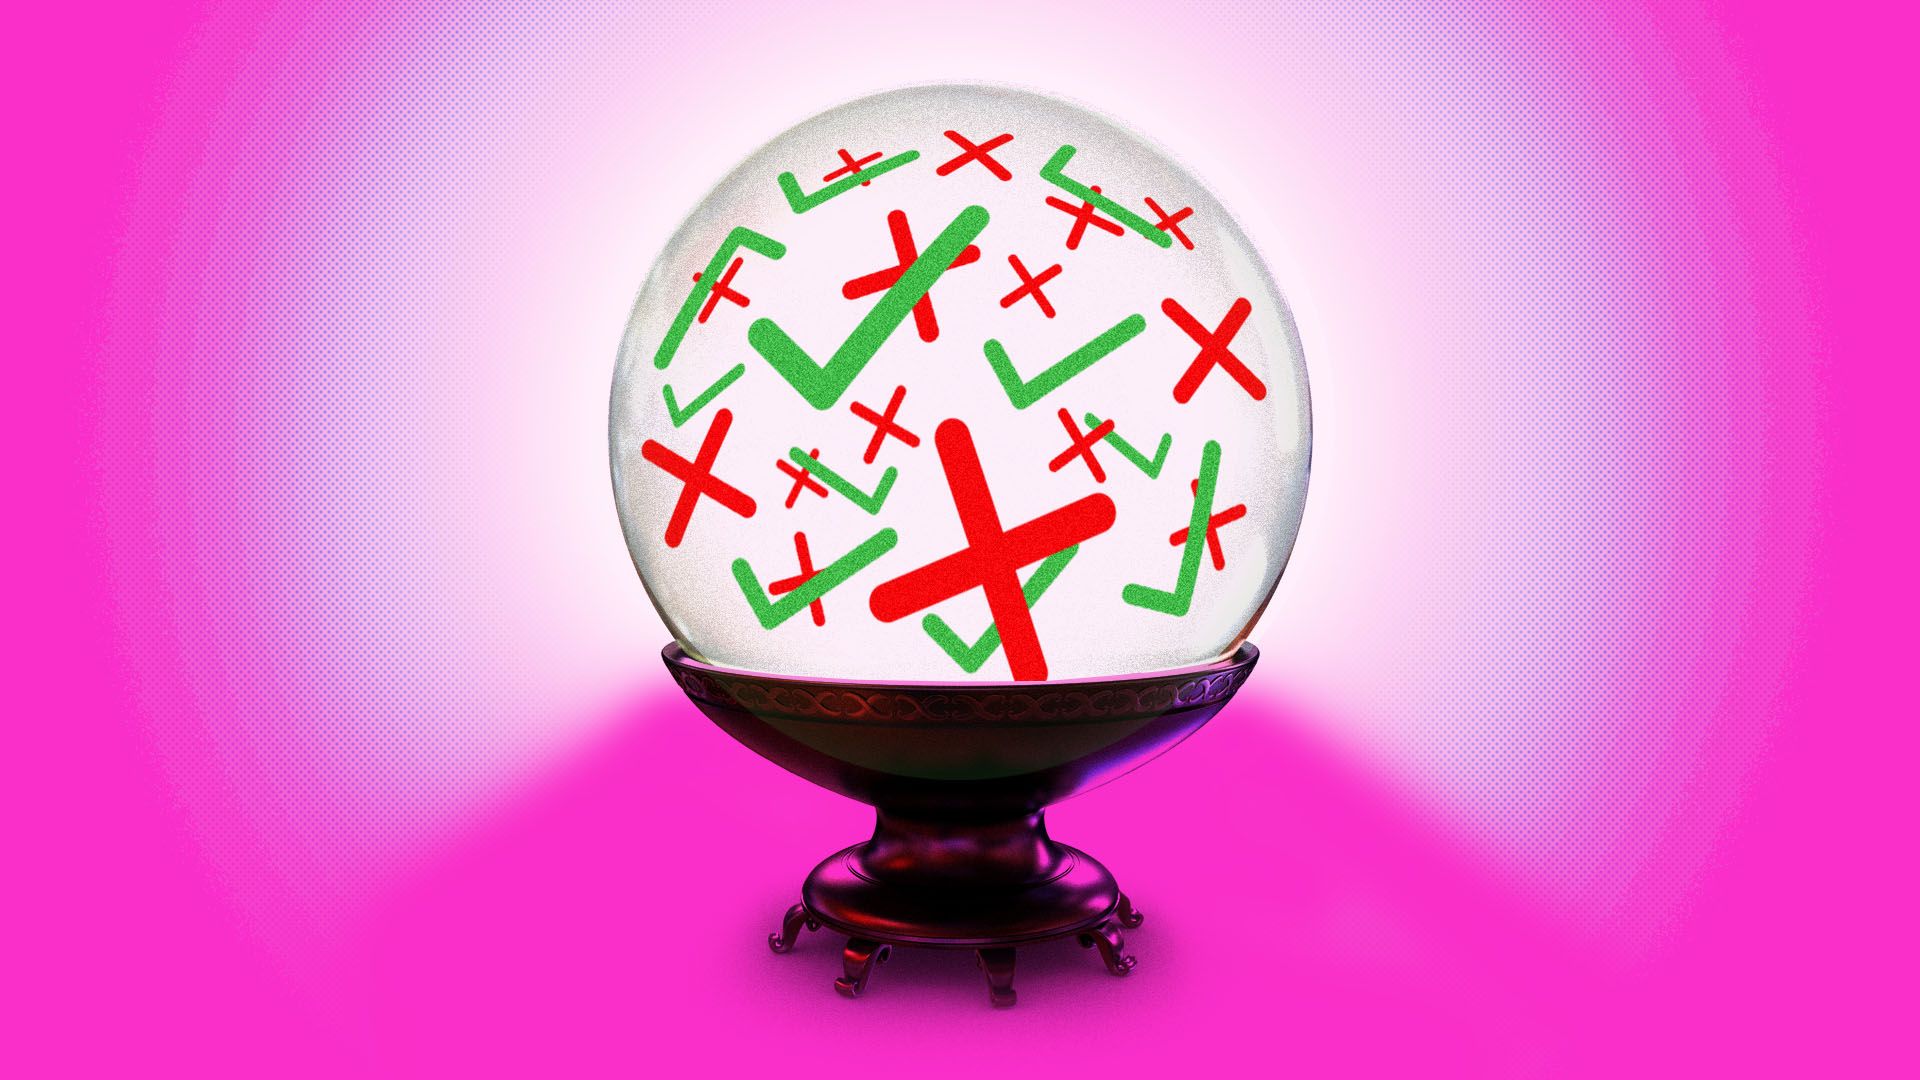 Illustration of a crystal ball with check marks and plus signs inside